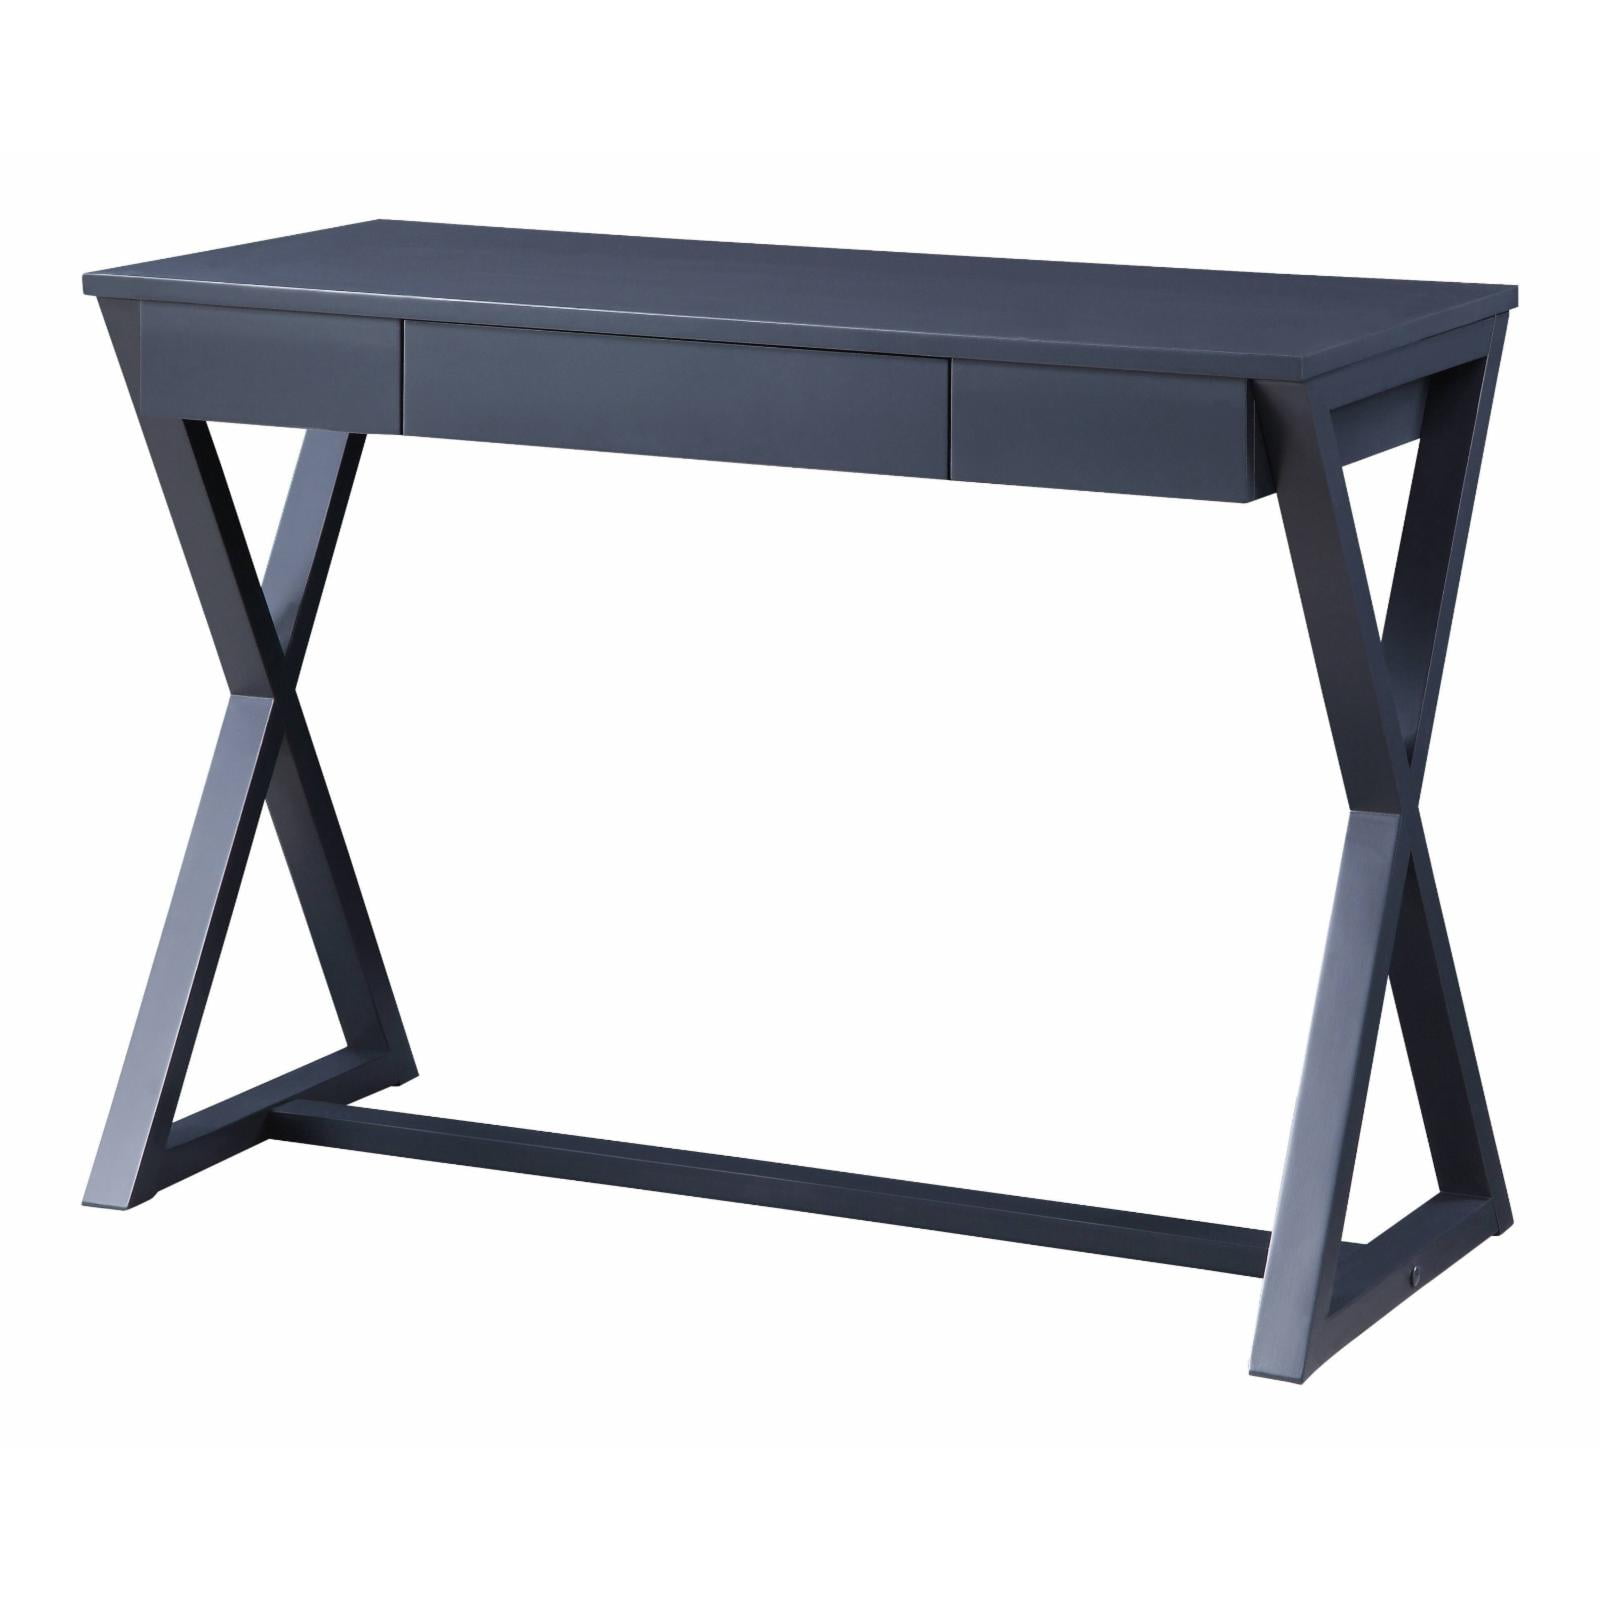 Picture of Acme Furniture AC00920 42 x 19 x 30 in. Nalo Console Table, Charcoal